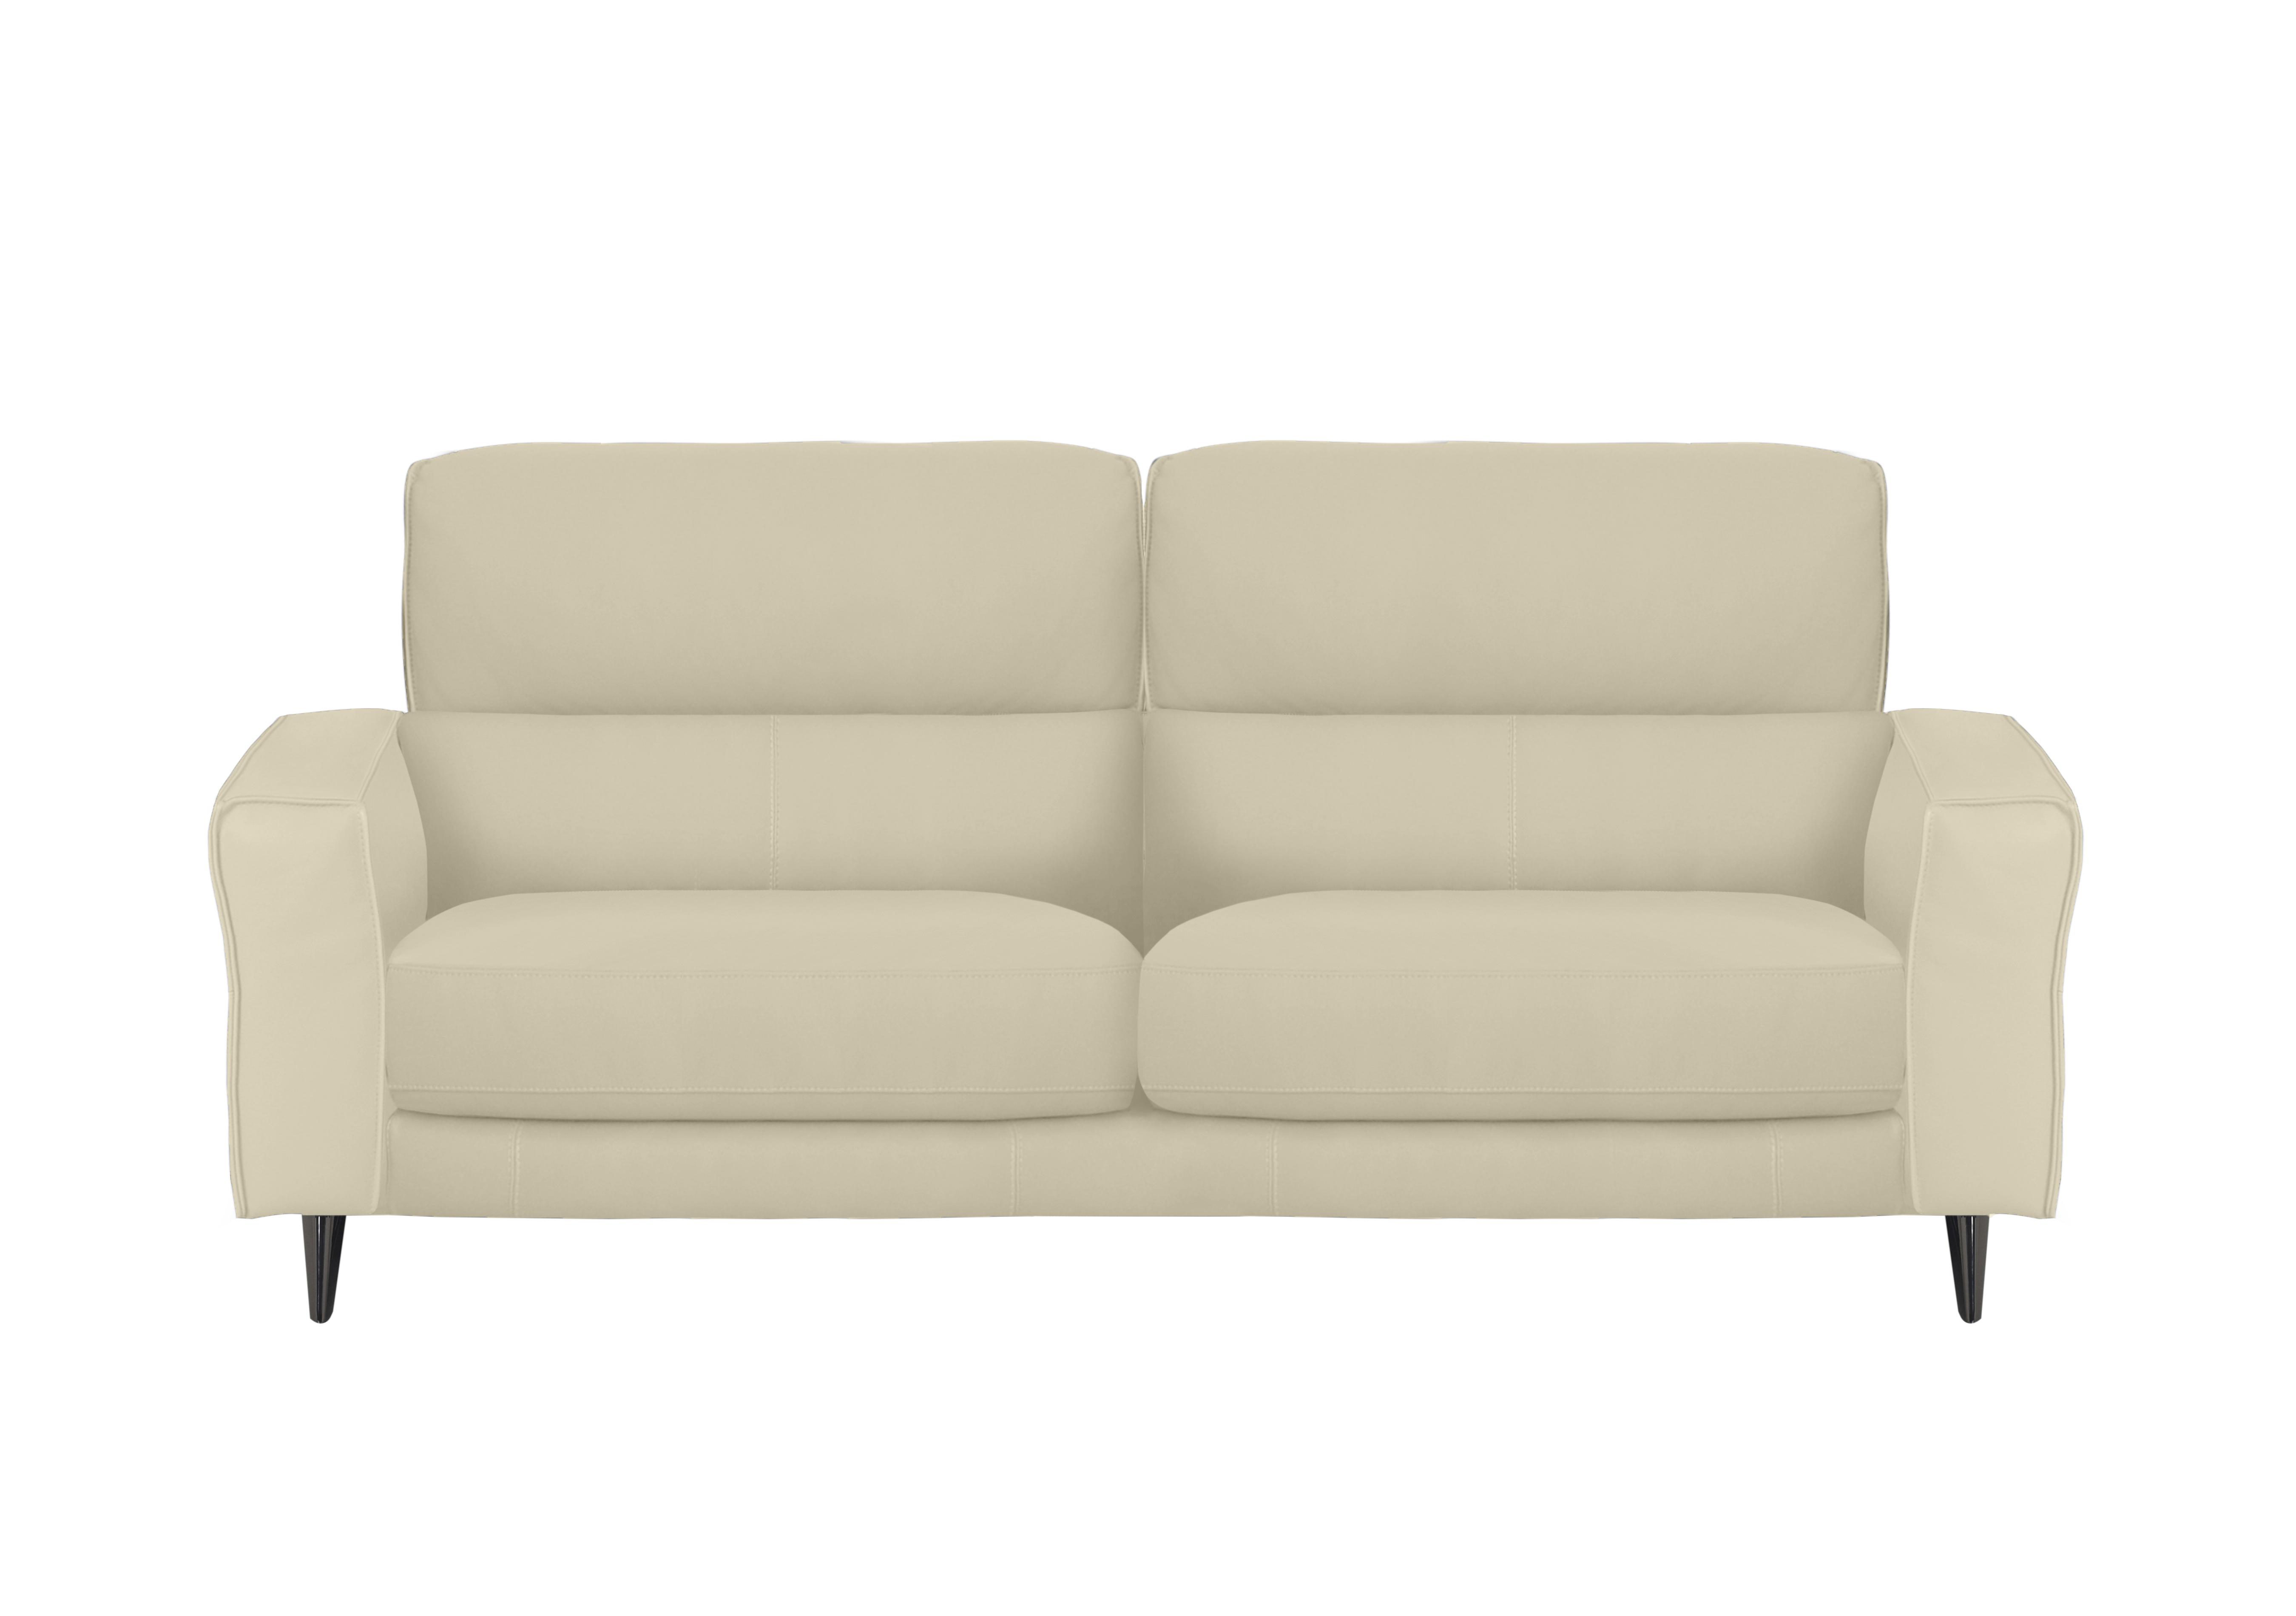 Axel 3 Seater Leather Sofa in Bv-862c Bisque on Furniture Village